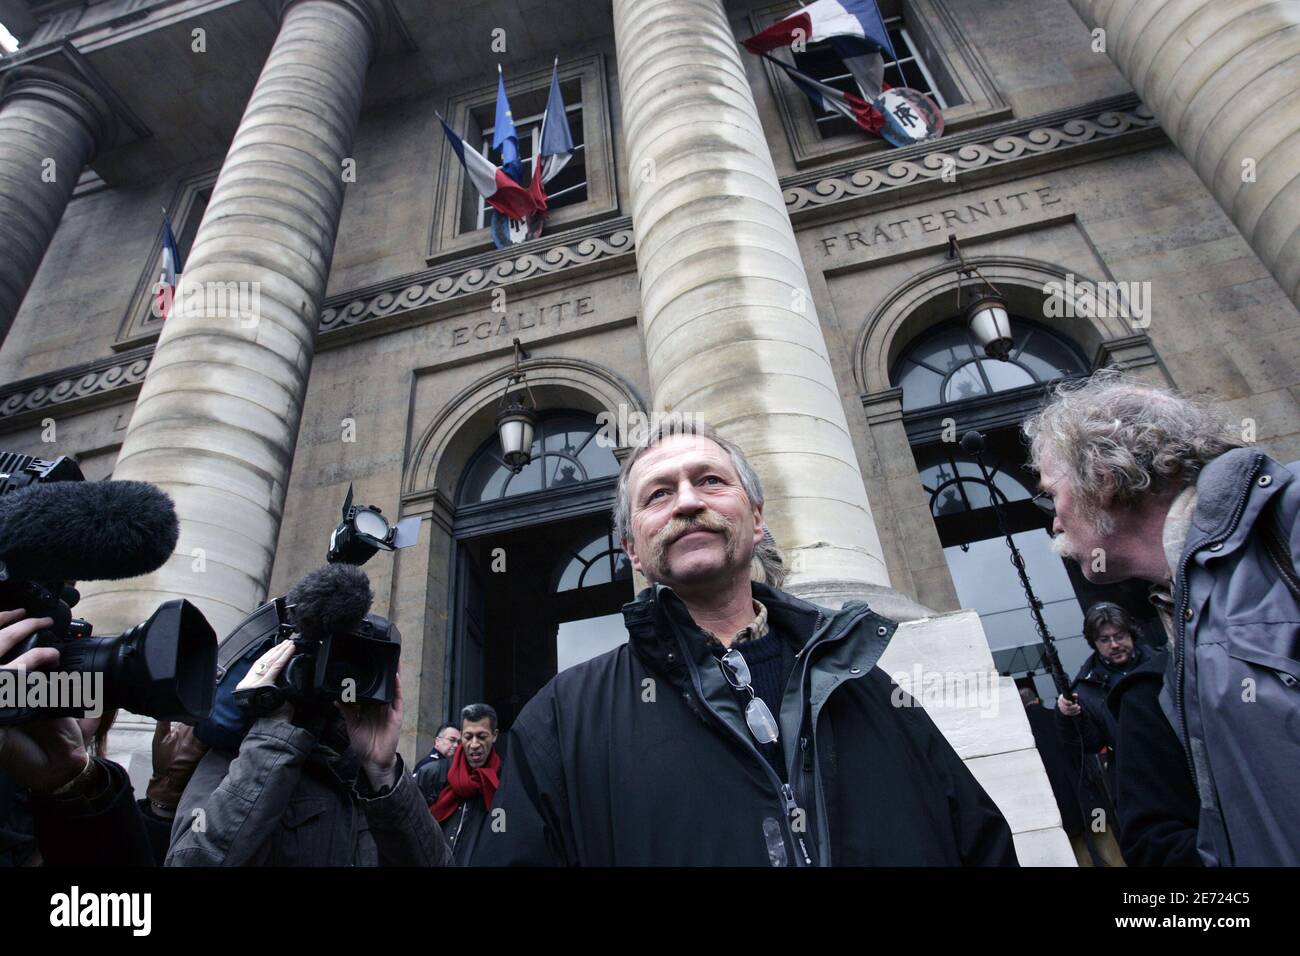 Jose Bove appears in Paris court on february 7, 2007. The appeals court upheld a verdict and four-month jail sentence for French farmer and anti-globalization activist Jose Bove for destroying a field of genetically modified corn. Bove, who wants to run in France's presidential elections this year, was sentenced in 2005 for destroying a field of corn planted by U.S. seed company Pioneer Hi-Bred. Photo by Thibault Camus/ABACAPRESS.COM Stock Photo